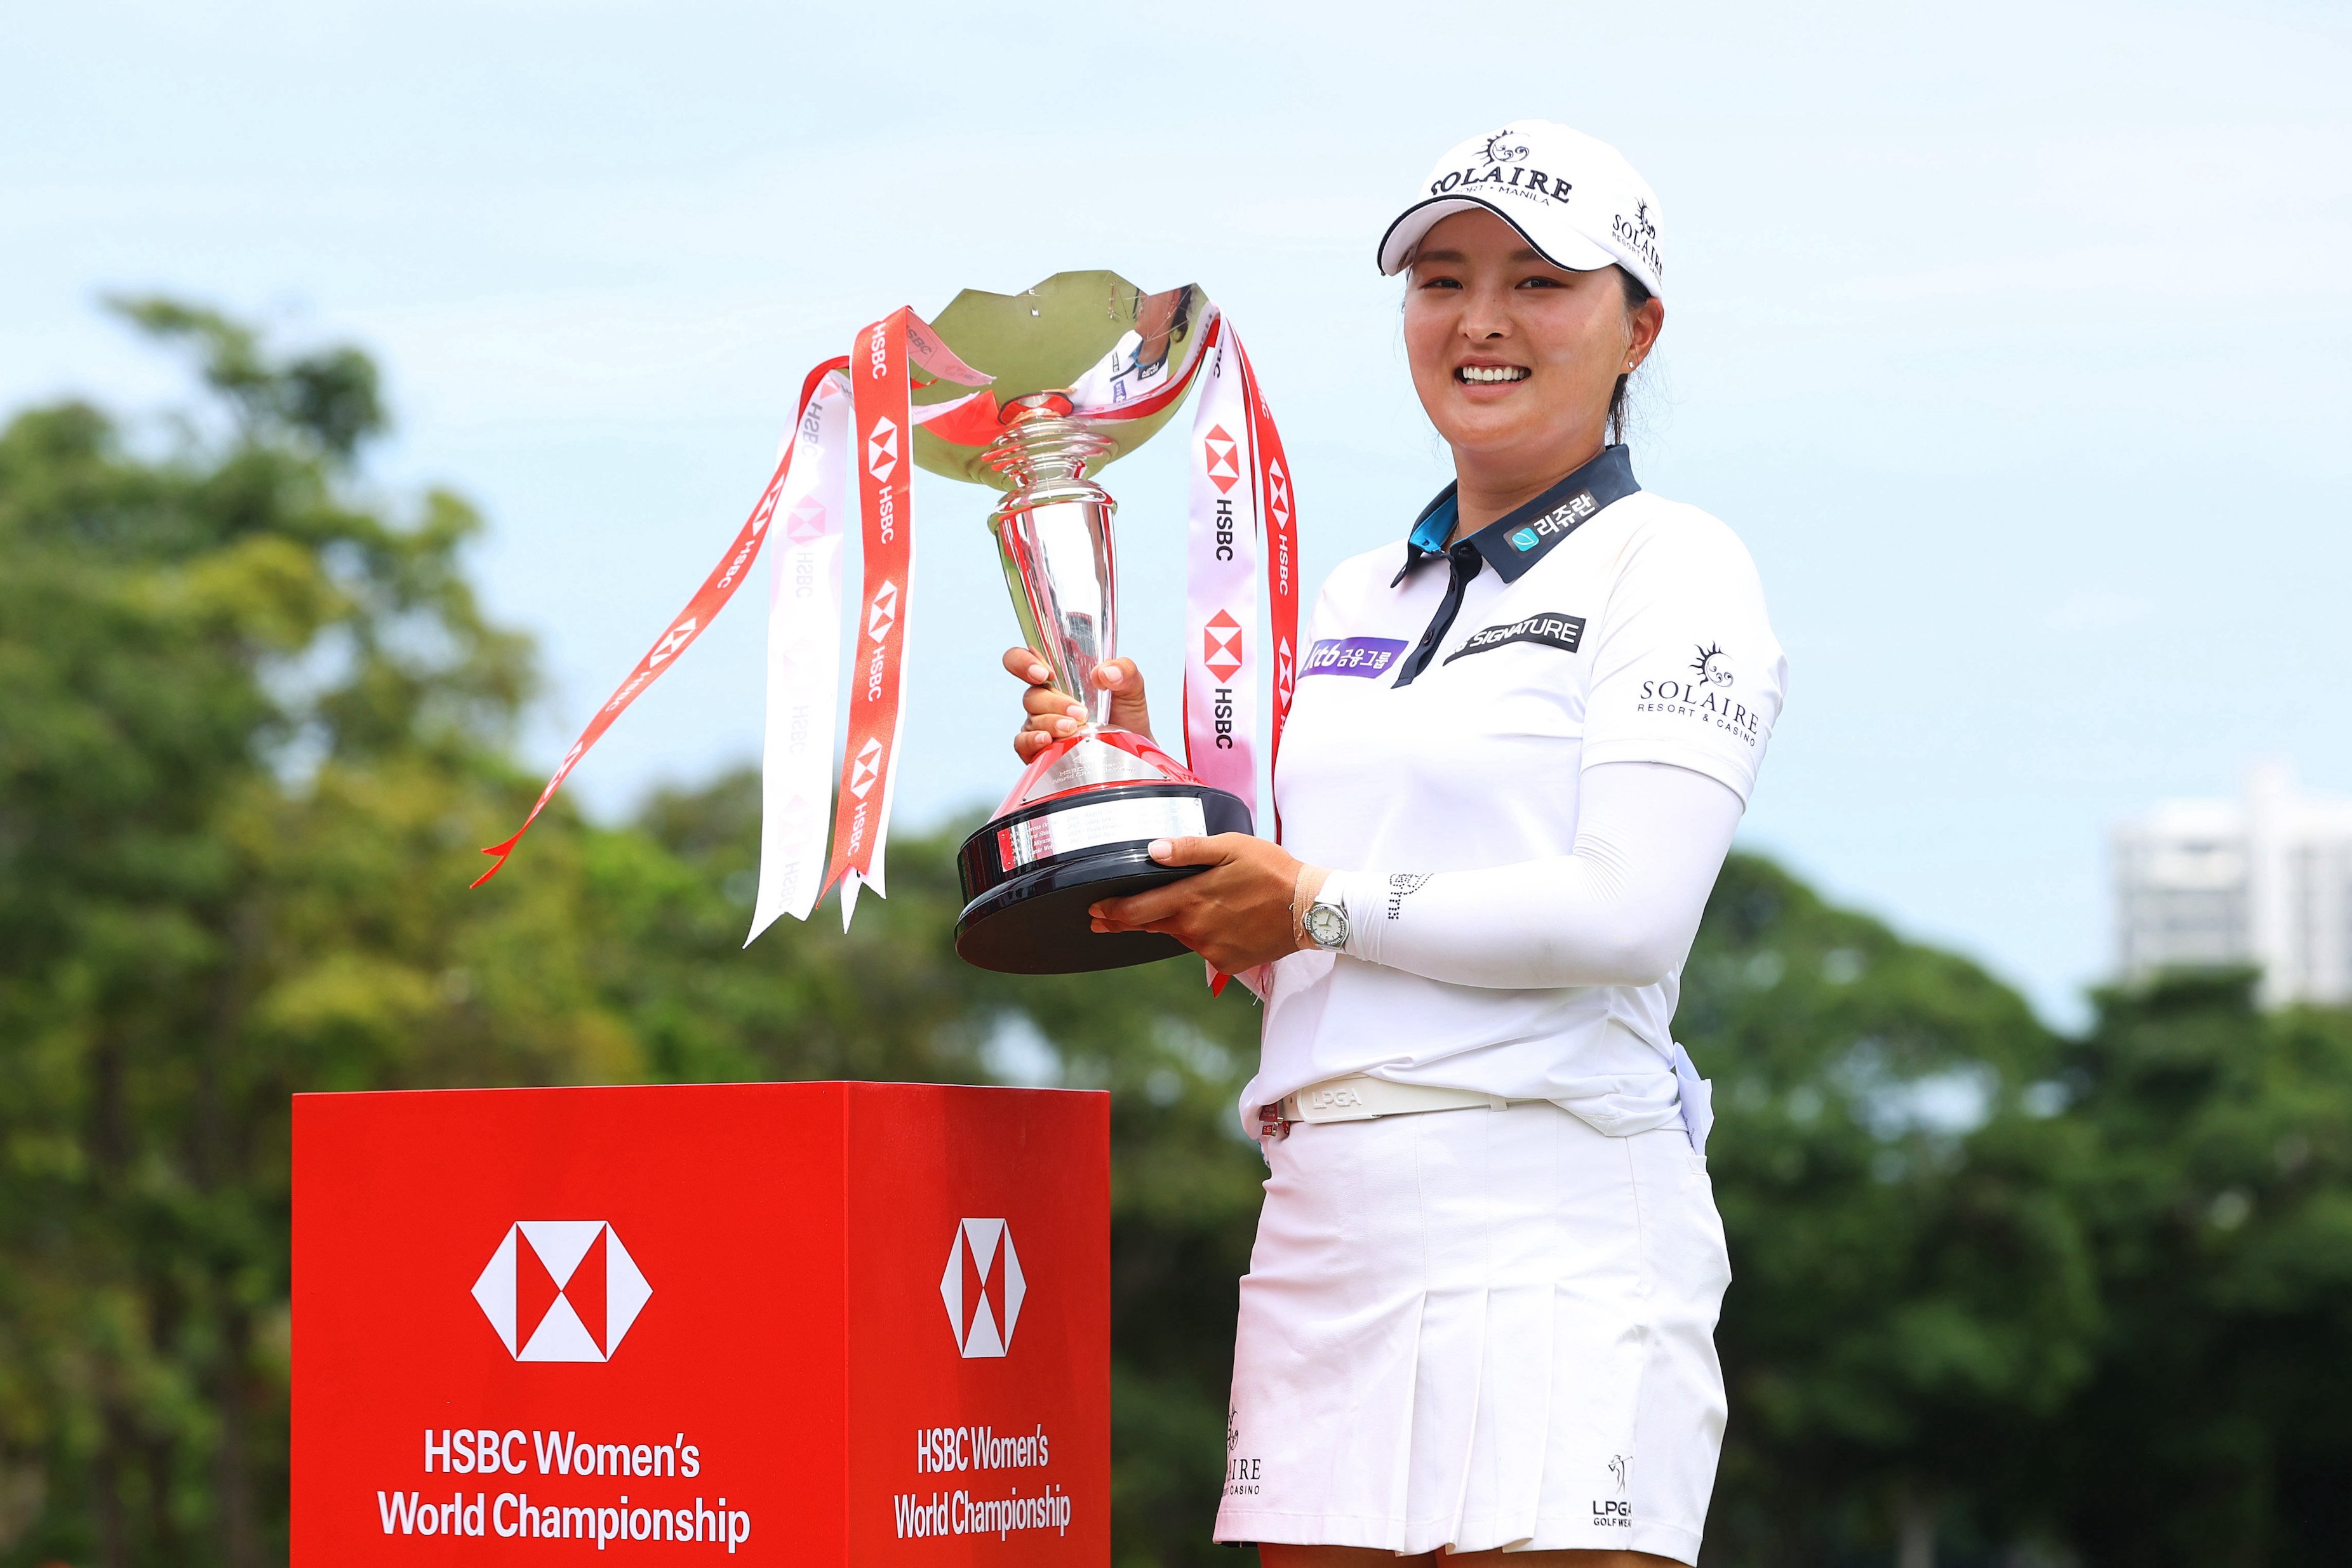 World No 1 Ko Jin-young bags S$350,000, after 2-stroke win at HSBC Women's World Championship!